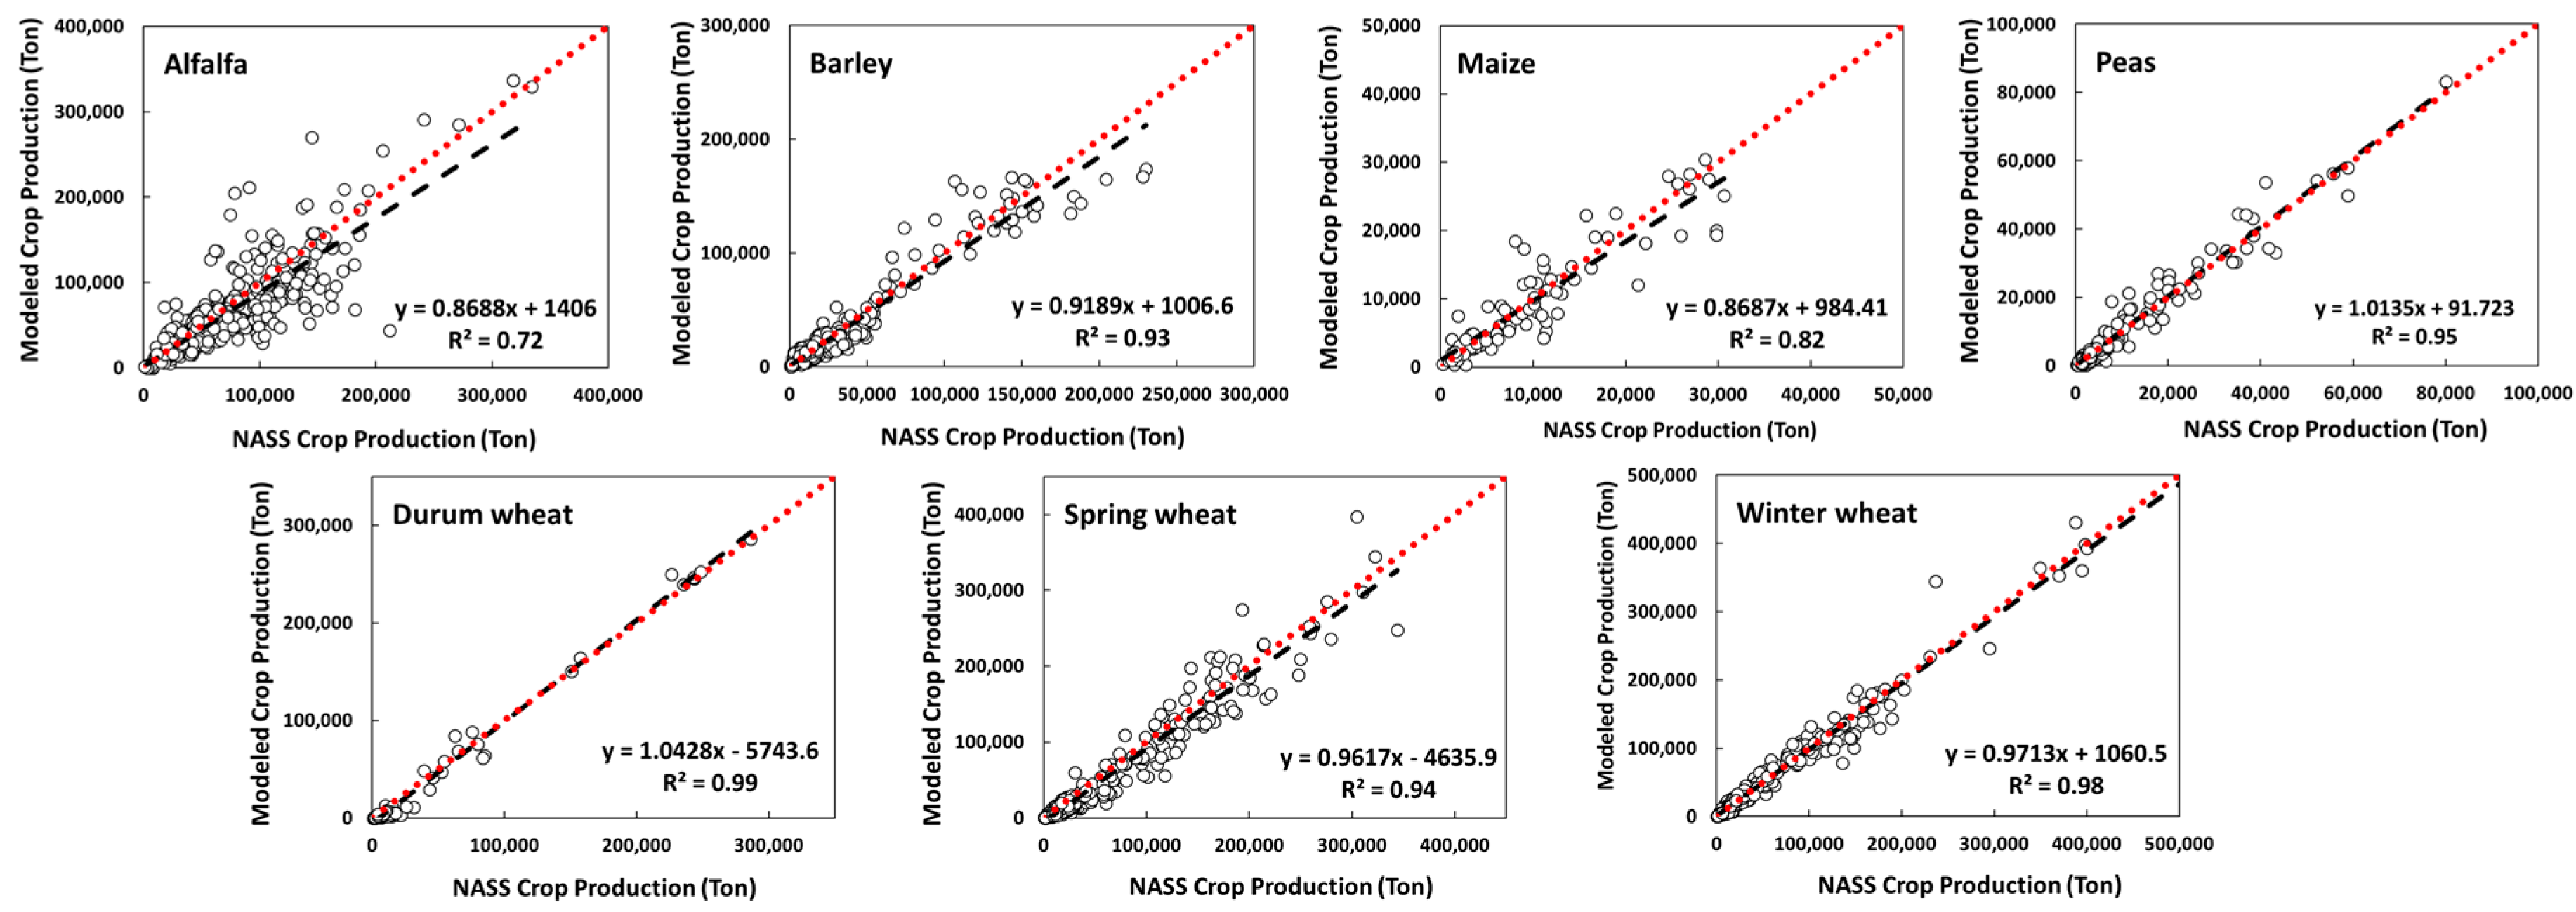 The comparisons between modeled annual crop production and USDA NASS reported county-level crop production data during the study period of 2008 to 2015 for the major crop types across Montana, including alfalfa, barley, maize, peas, durum wheat, spring wheat and winter wheat. The red dotted line is the 1:1 line, while the black dashed line is the linear regression relationship. He et al., 2018. Remote Sensing.